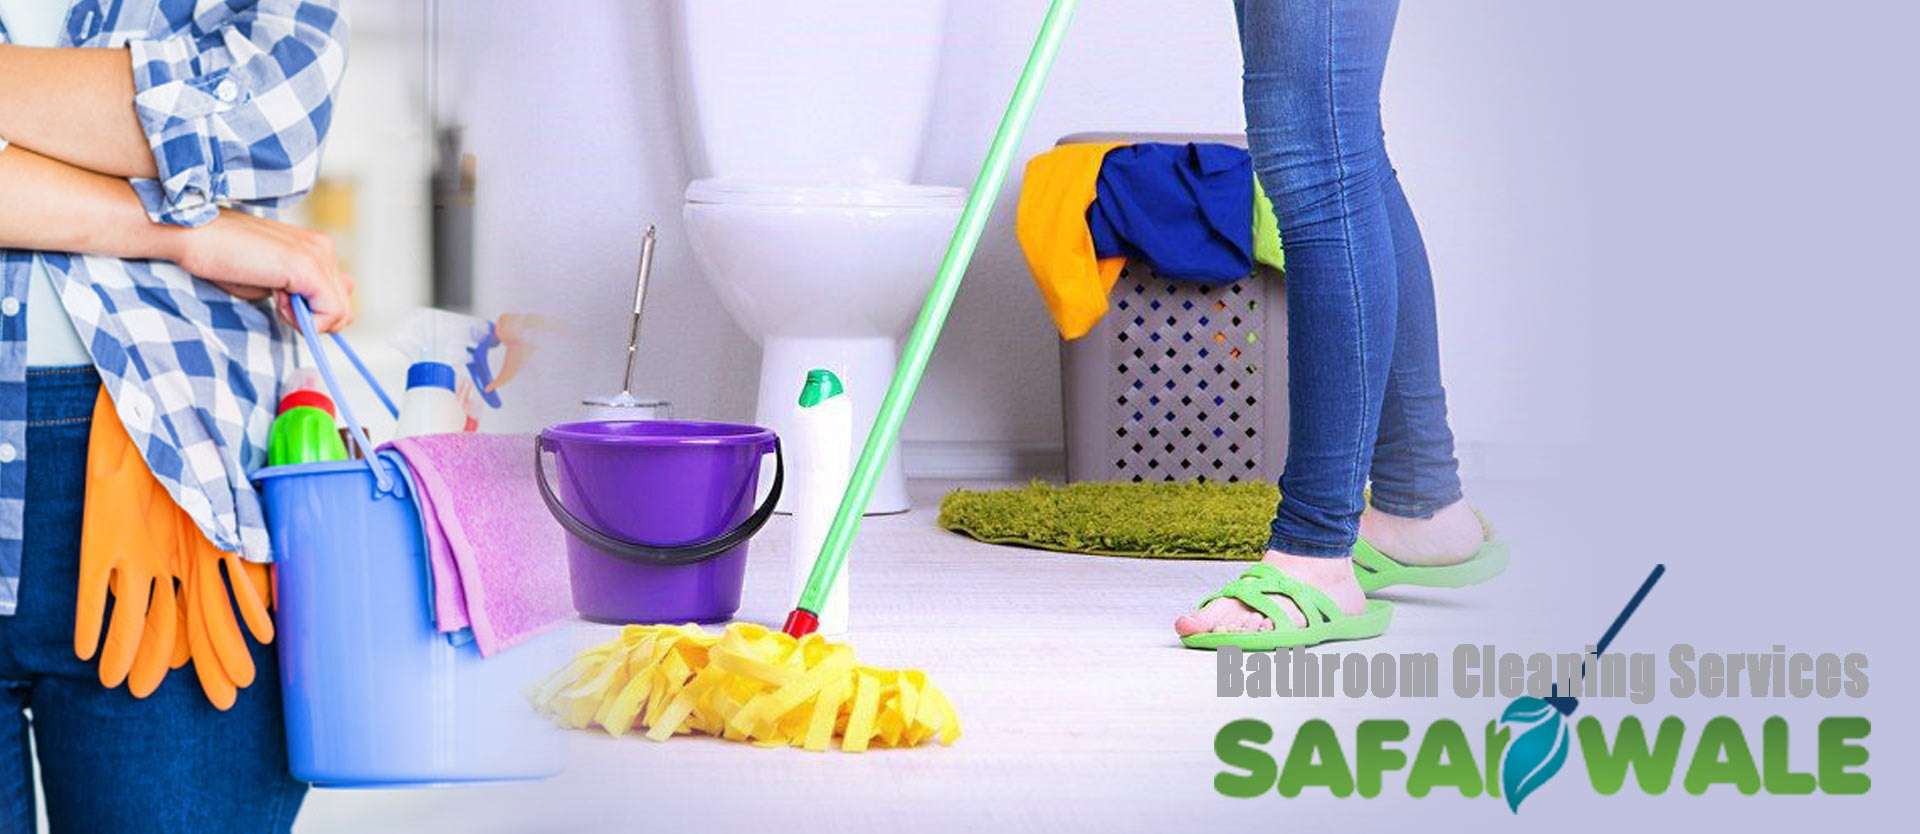 Bathroom Cleaning Services In Siddharth Vihar